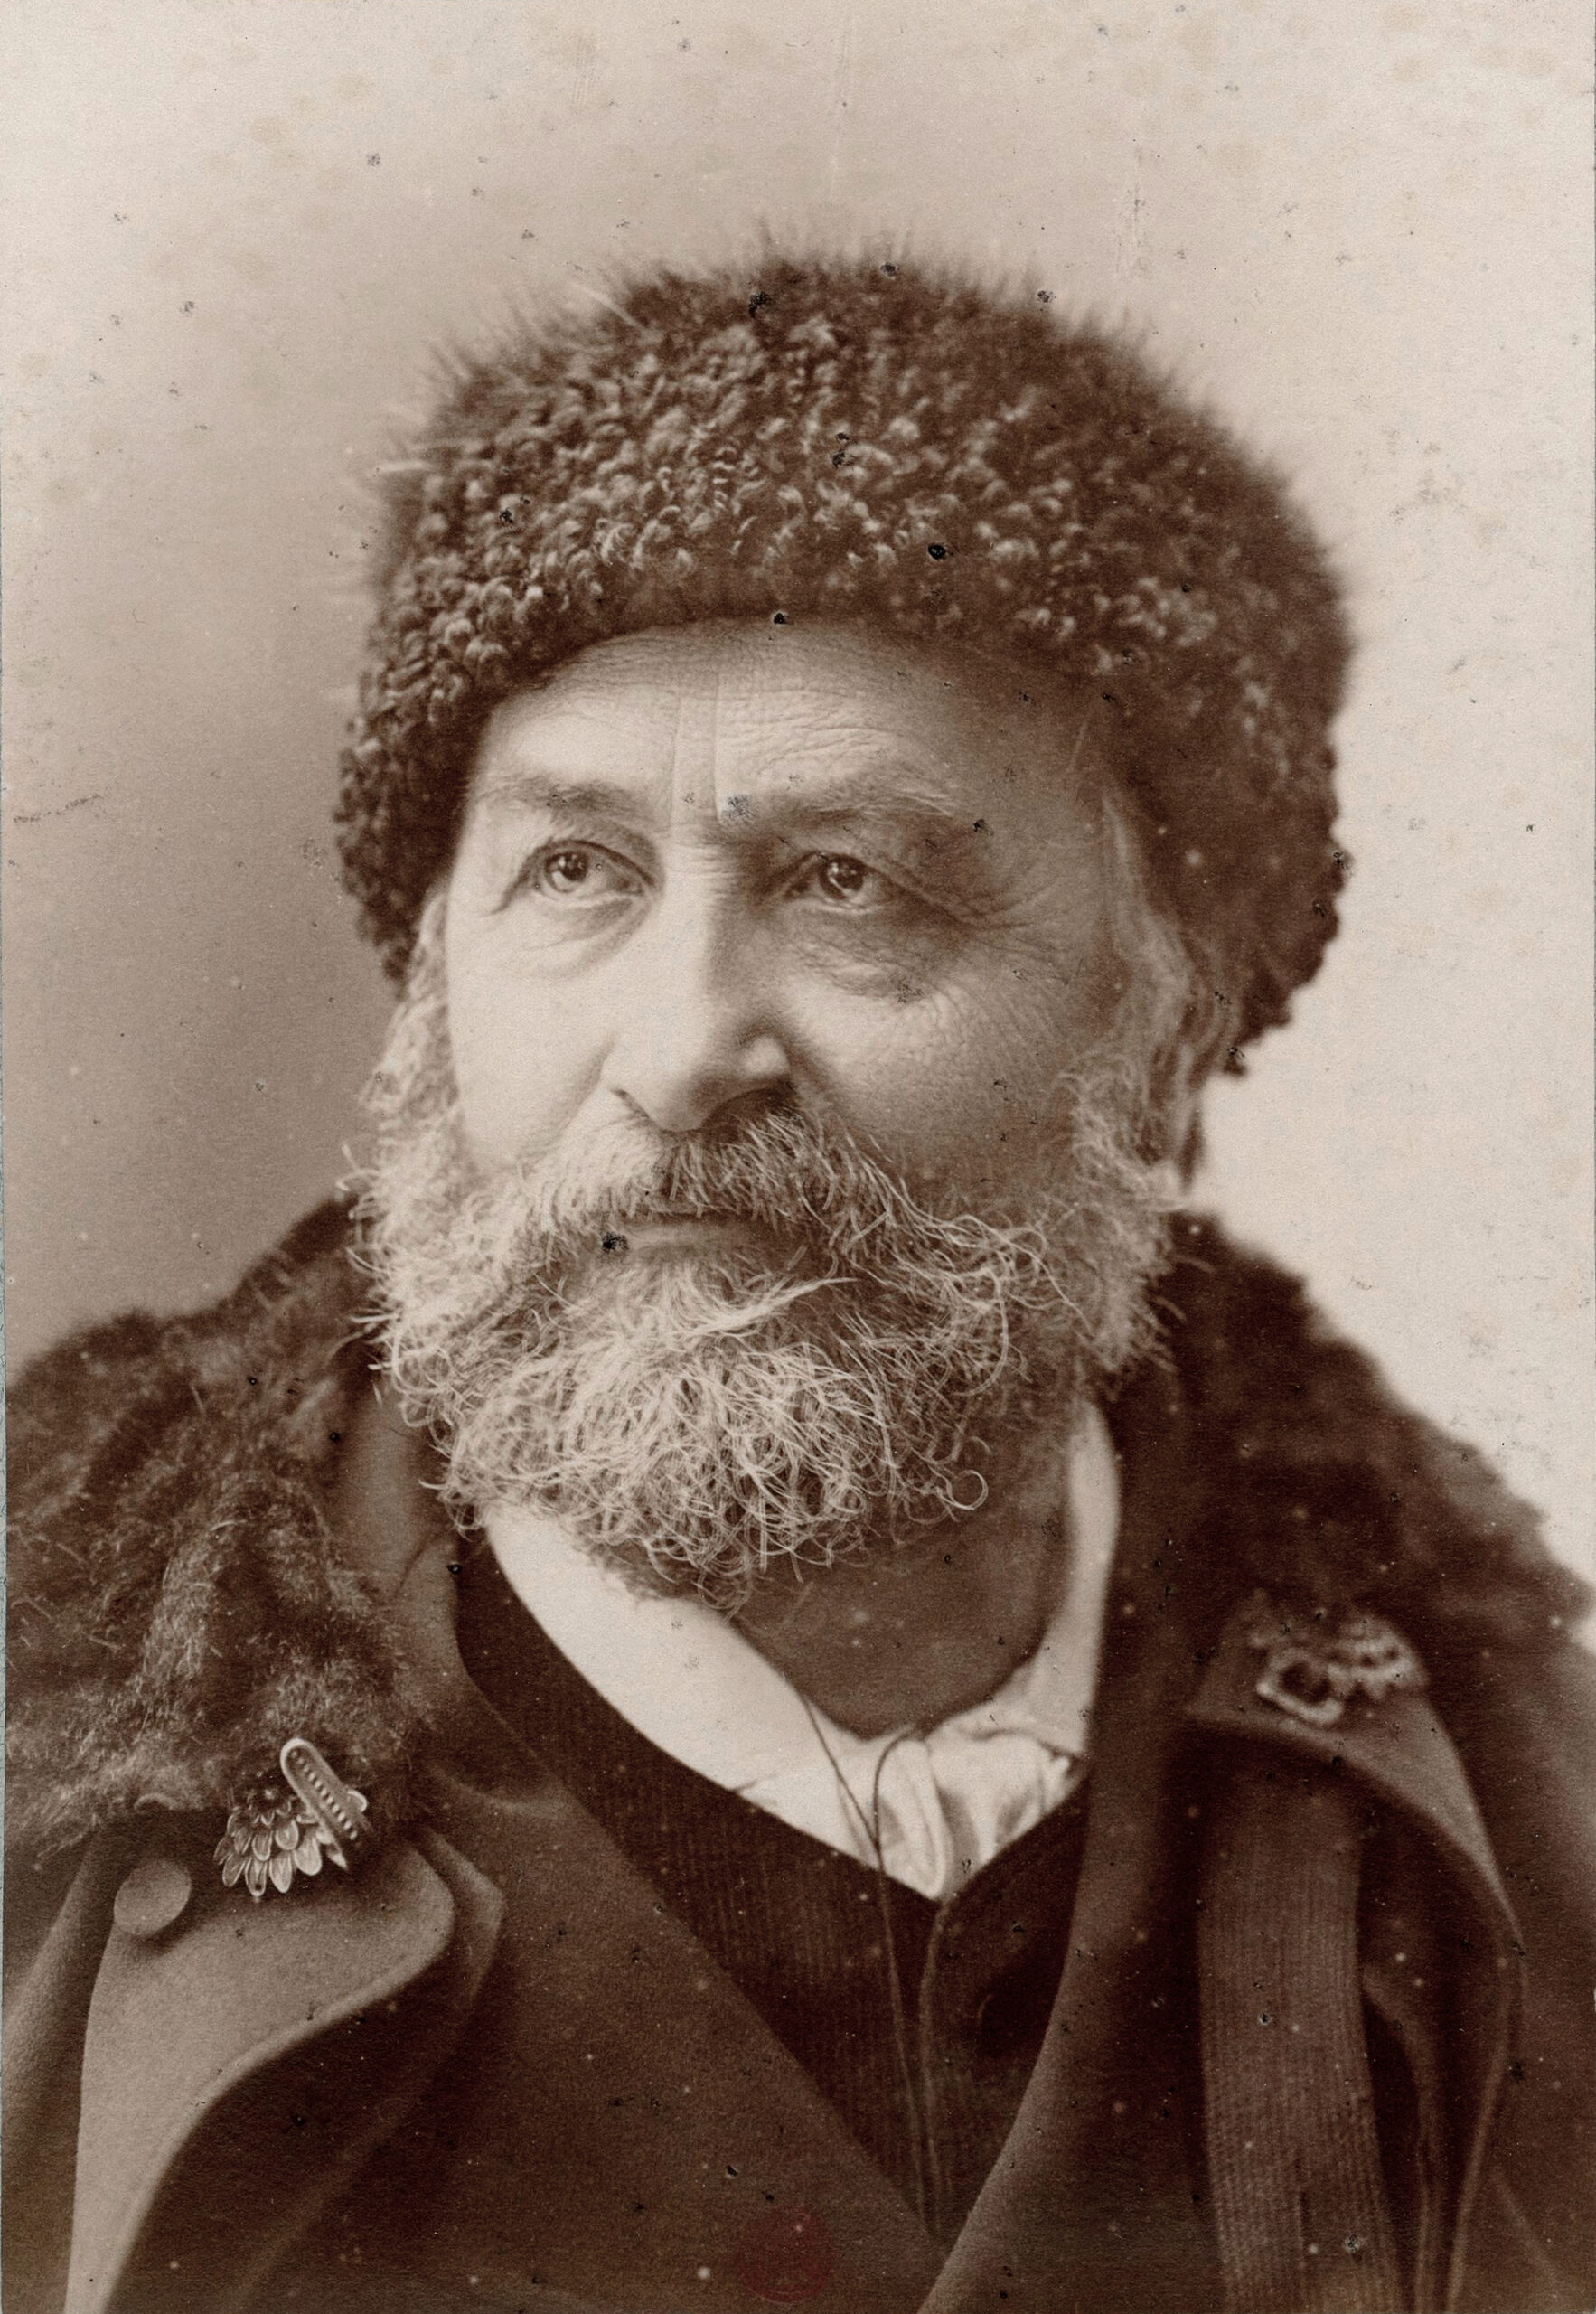 The sepia photograph of Élie Reclus is a head-and-shoulders shot in three-quarter view of an older man with a grizzled beard and moustache, wearing a Persian wool hat and a coat with a fur collar.